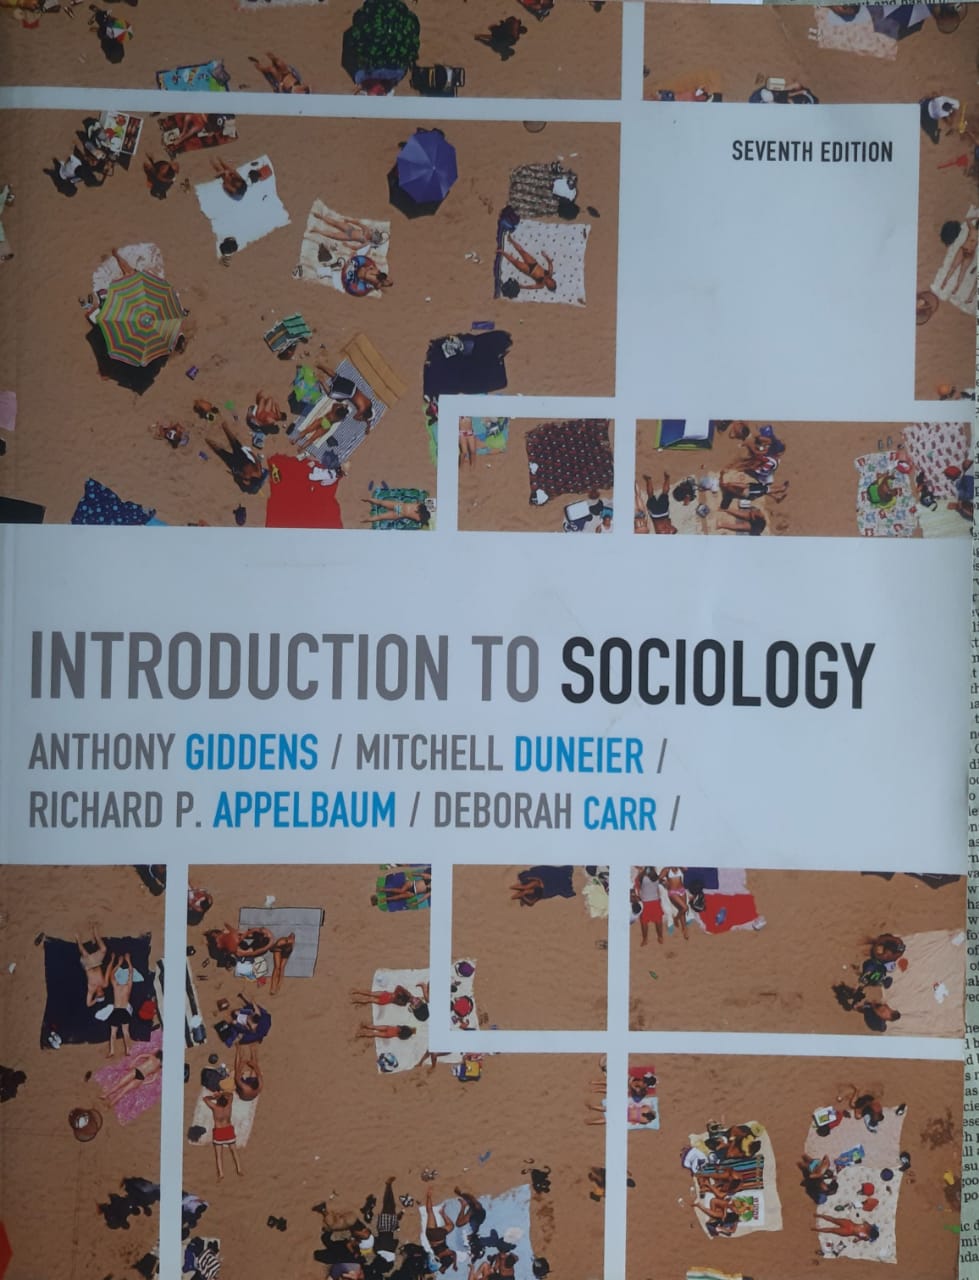 Introduction to Socialogy - 7th edition Image